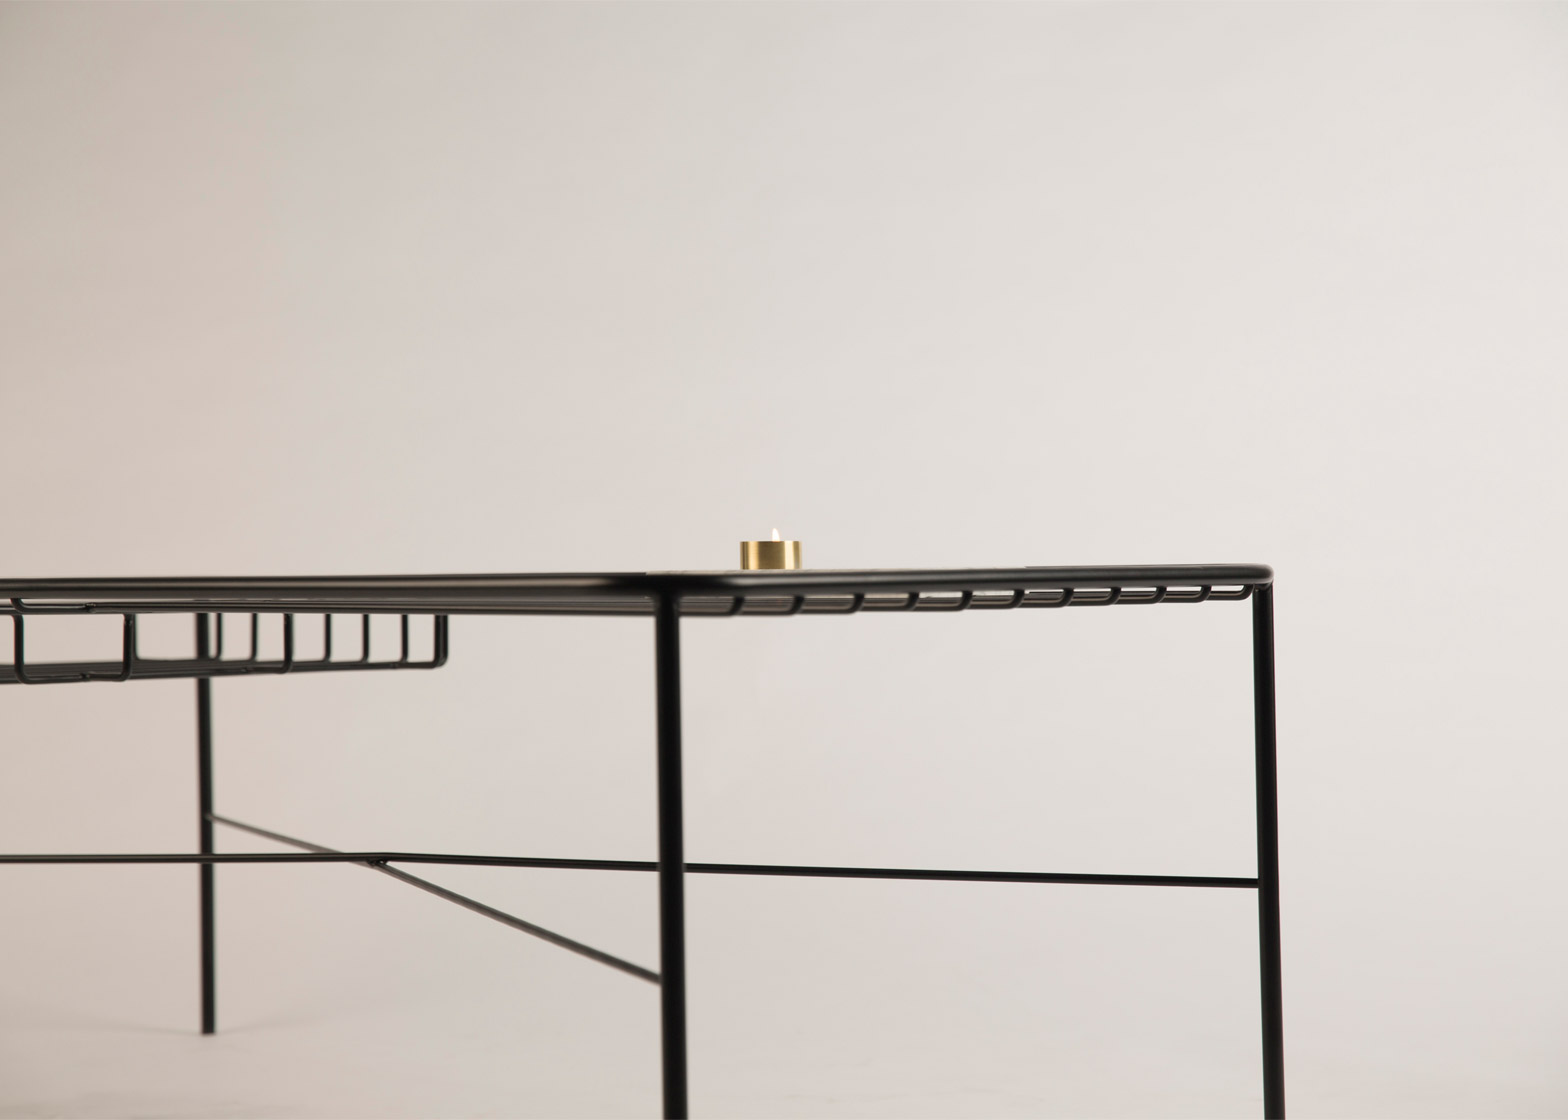 Alpina furniture by Ries is made from minimal steel shapes